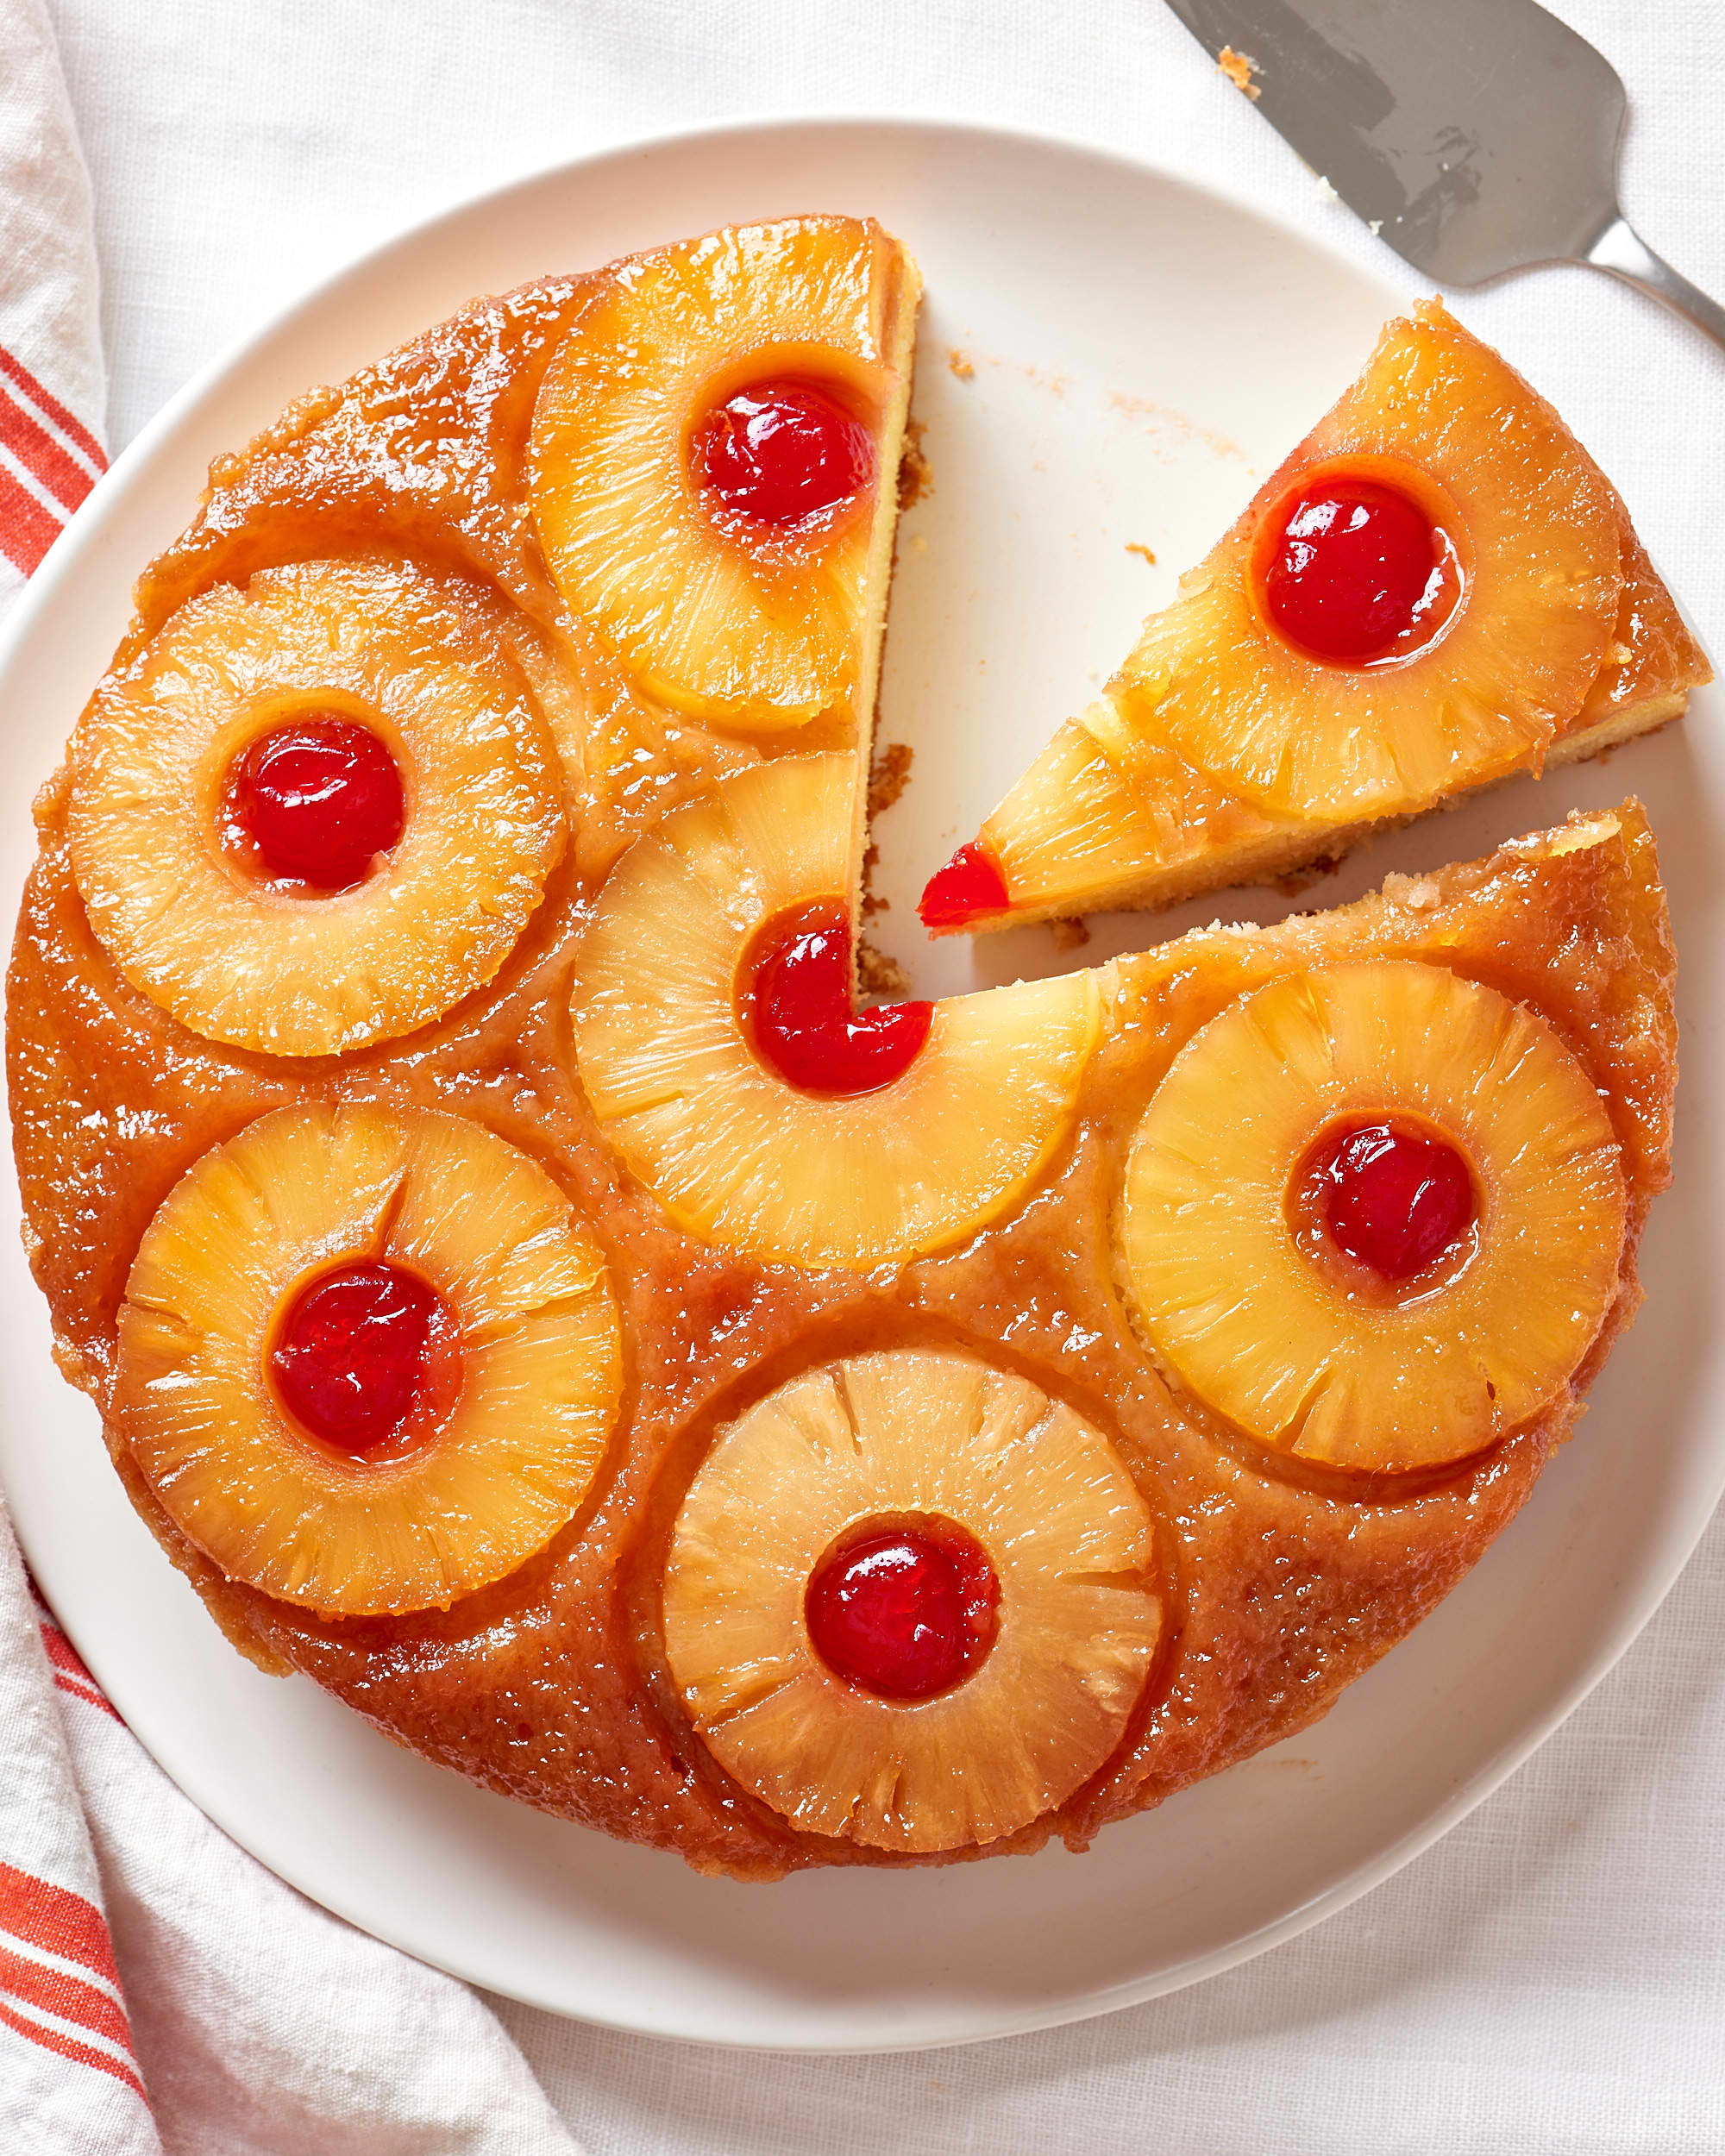 How To Make Easy Pineapple Upside Down Cake from Scratch  Kitchn